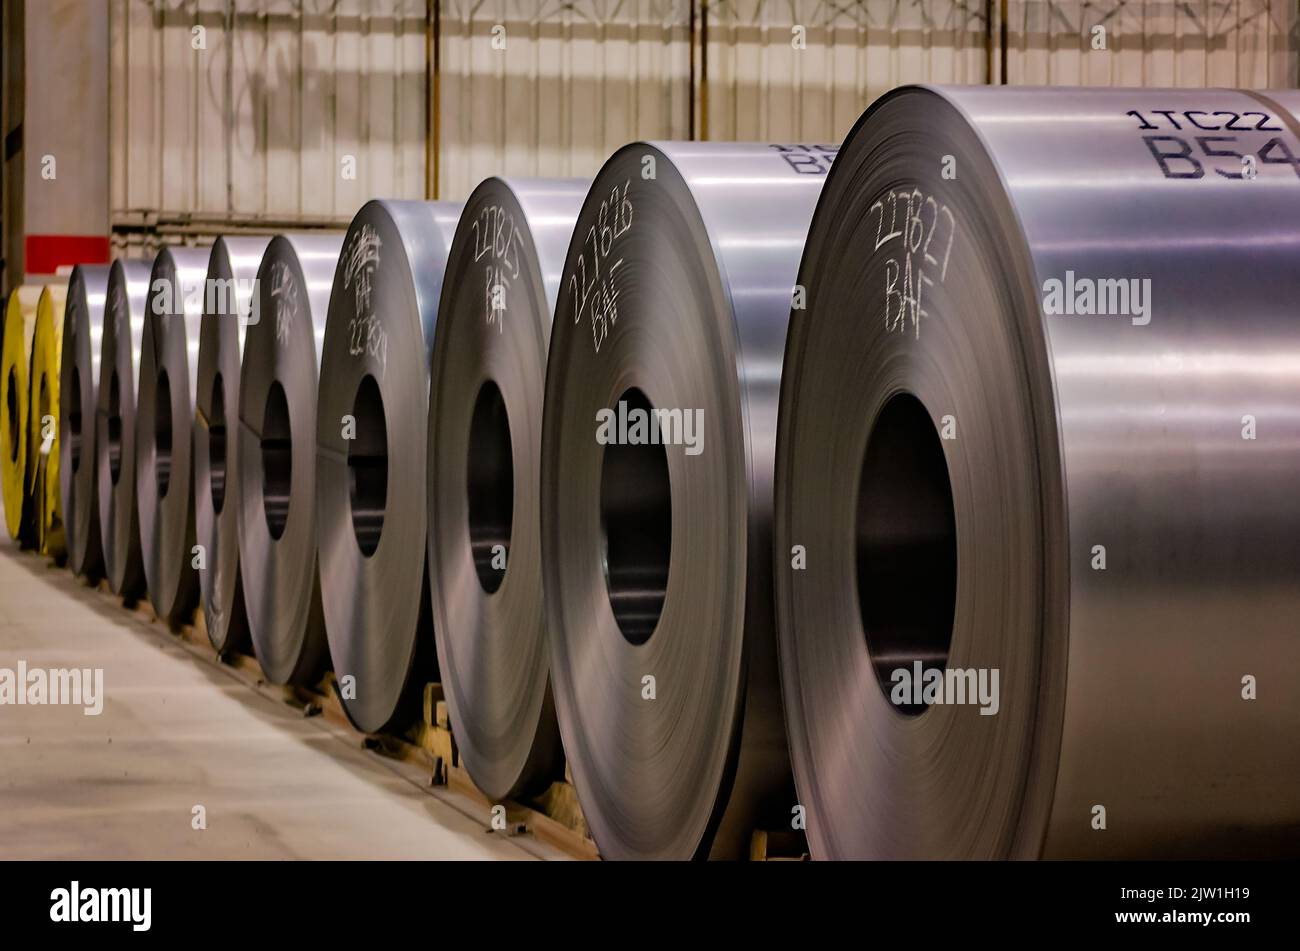 Steel coils are pictured in the cold mill at Severstal Columbus, Oct. 22, 2011, in Columbus, Mississippi. Stock Photo